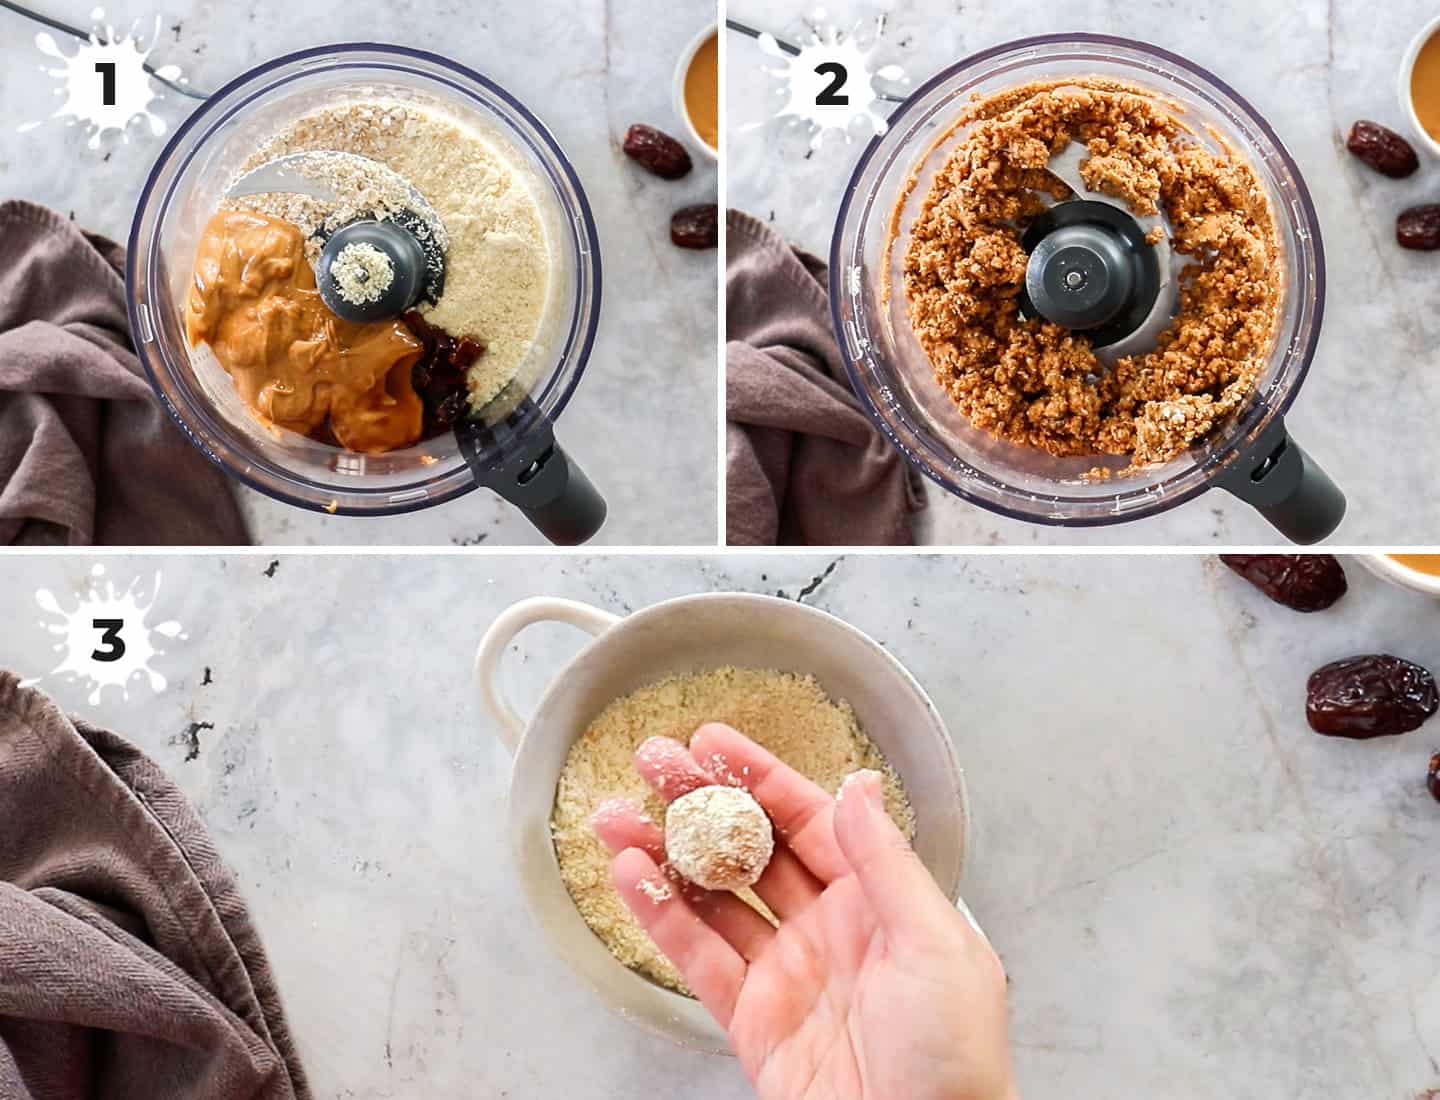 A collage of 3 images showing how to make peanut butter bliss balls.